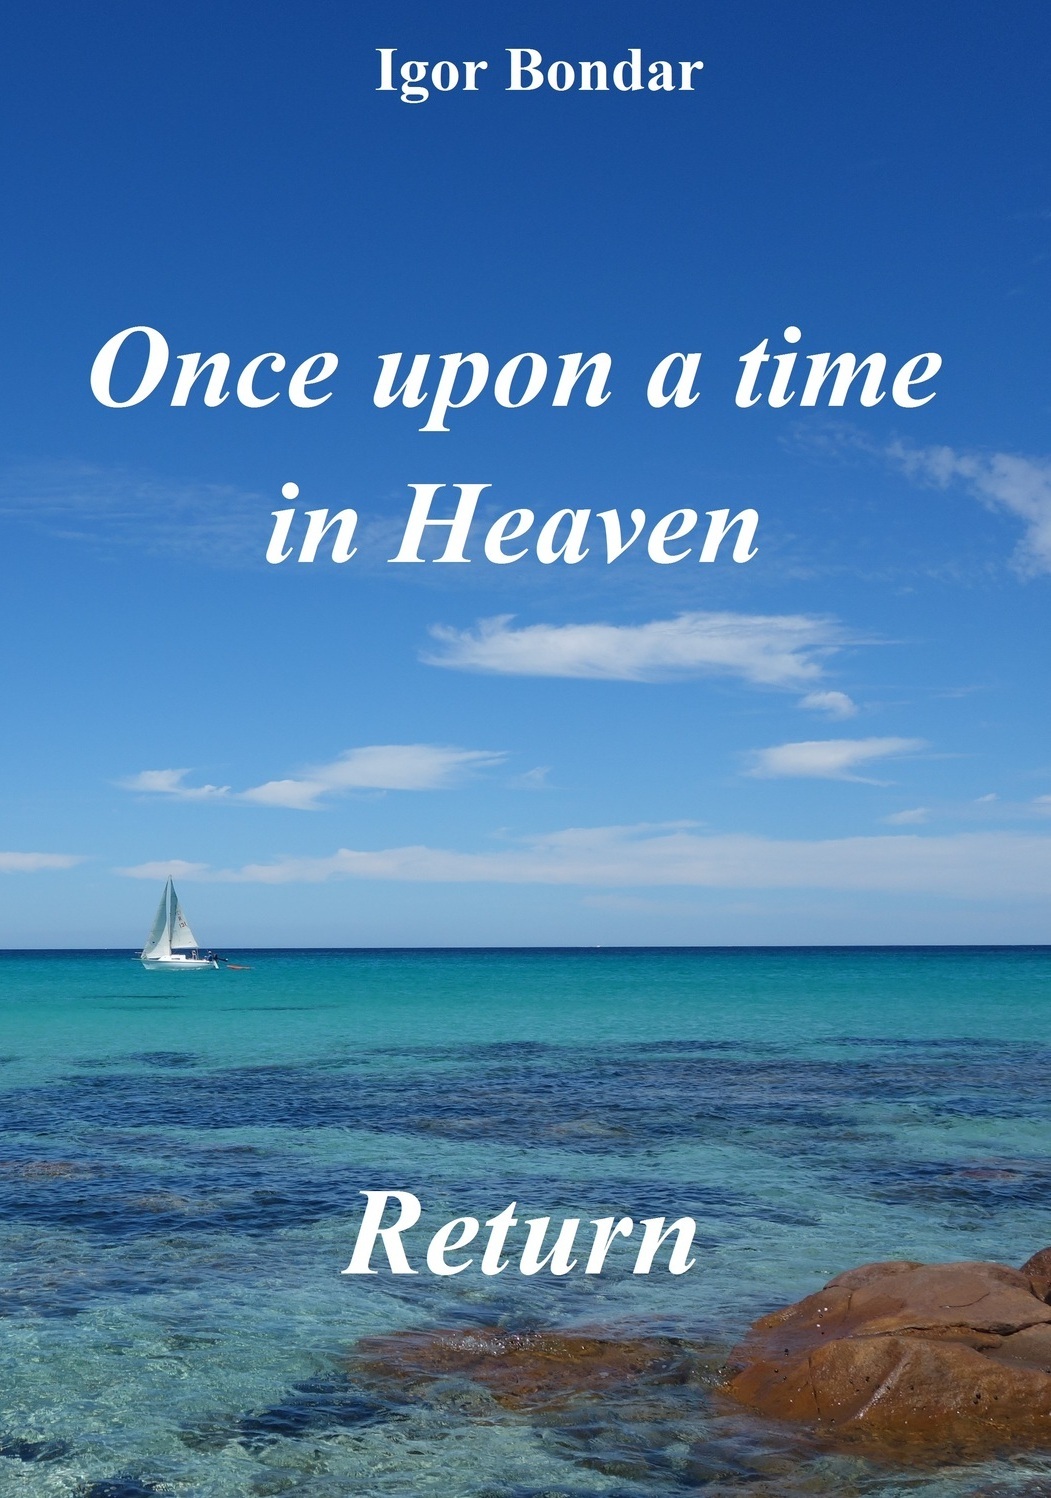 Once upon a time in Heaven. Return